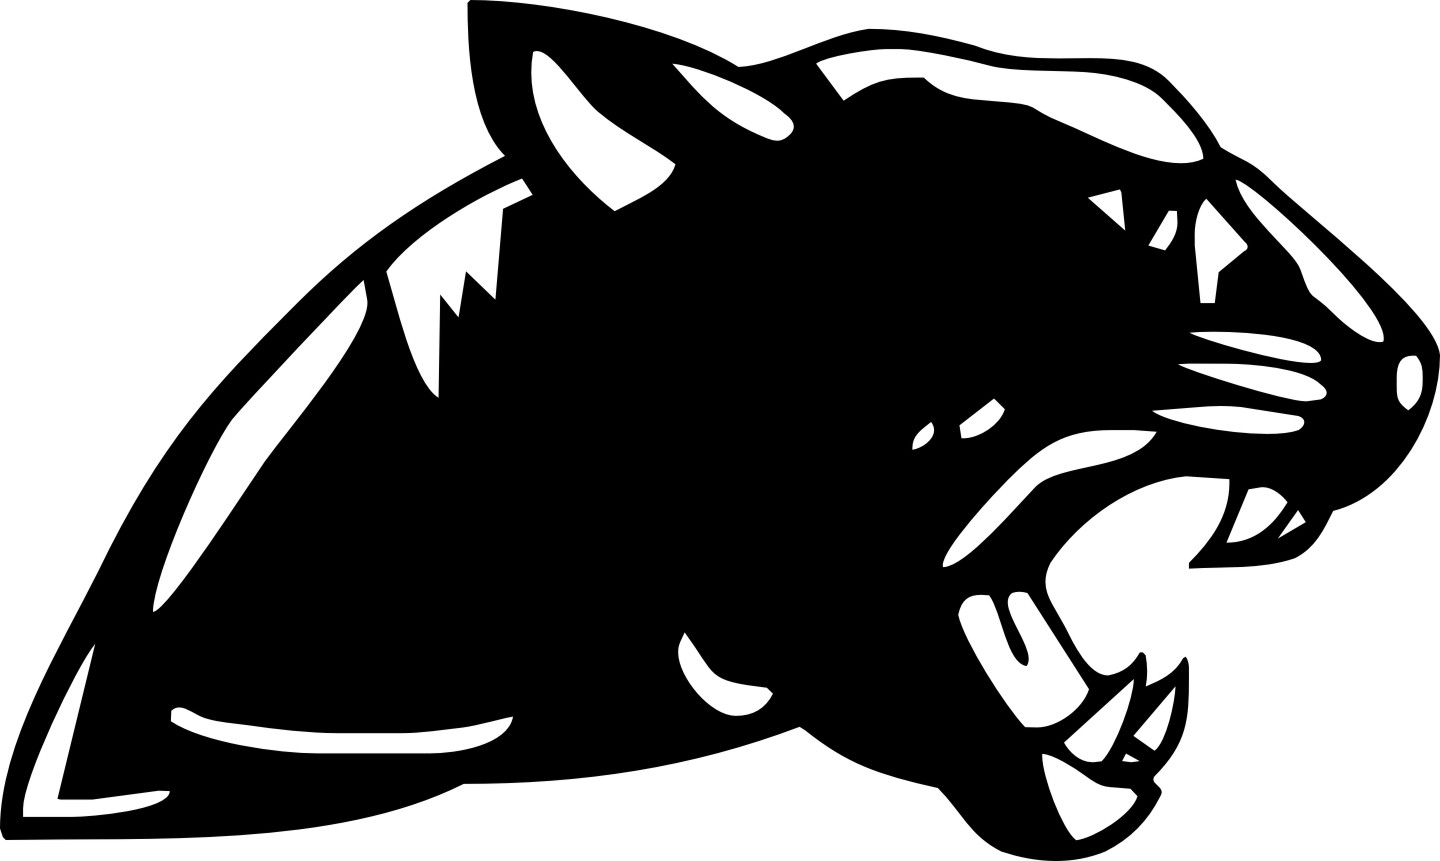 Cougar head clip art cougar panther mascot head vector graphic 2 